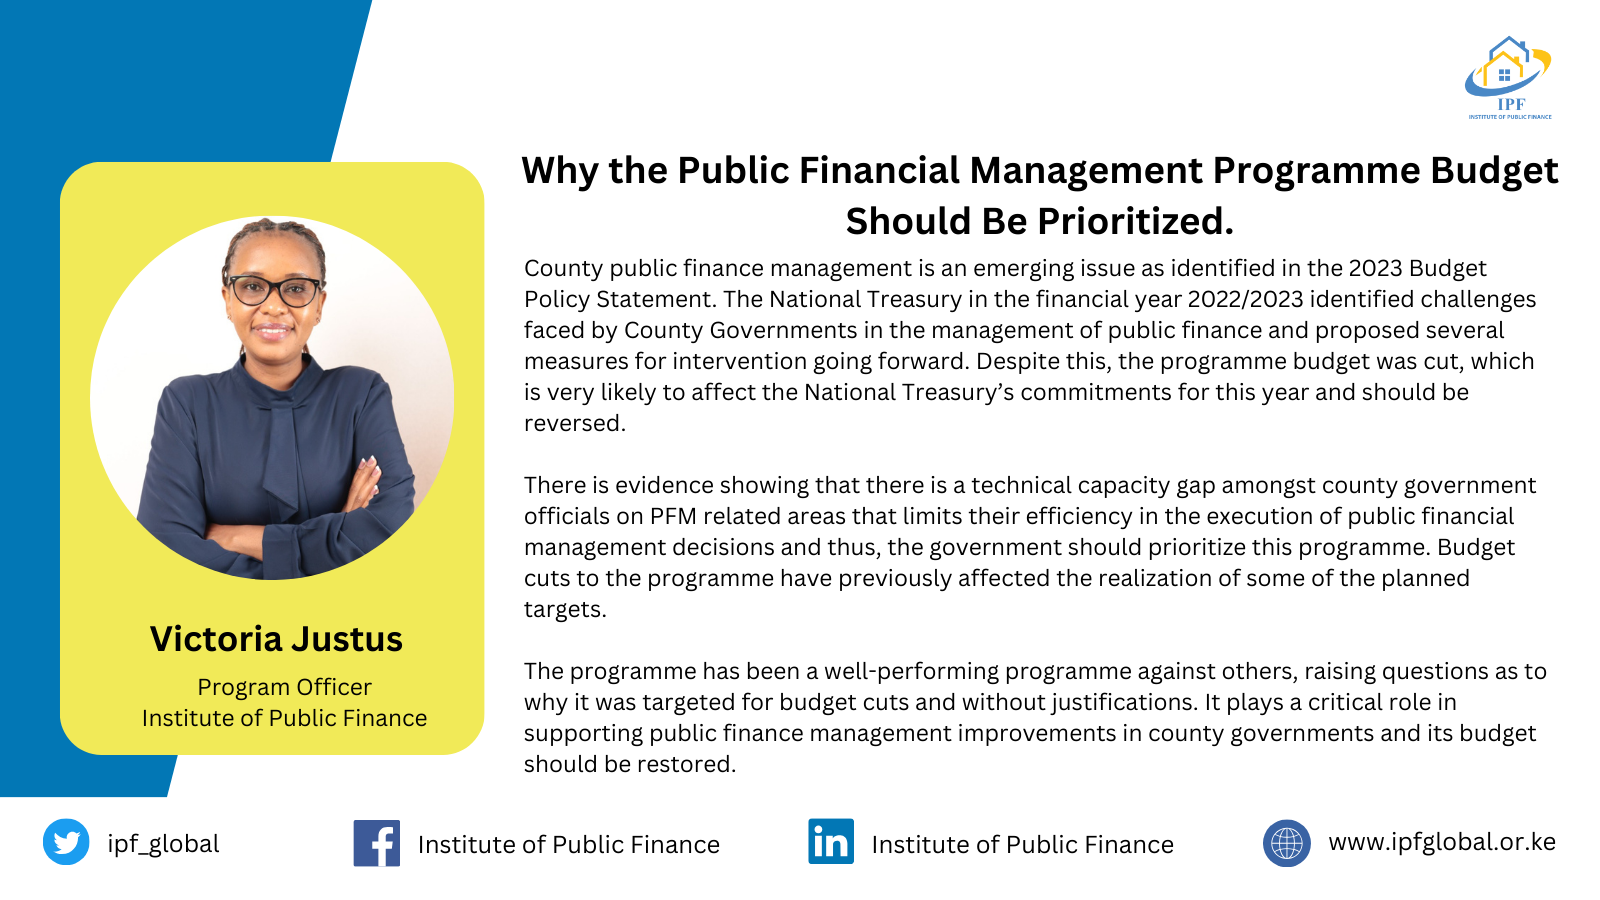 Why the Public Financial Management Programme Budget Should Be Prioritized